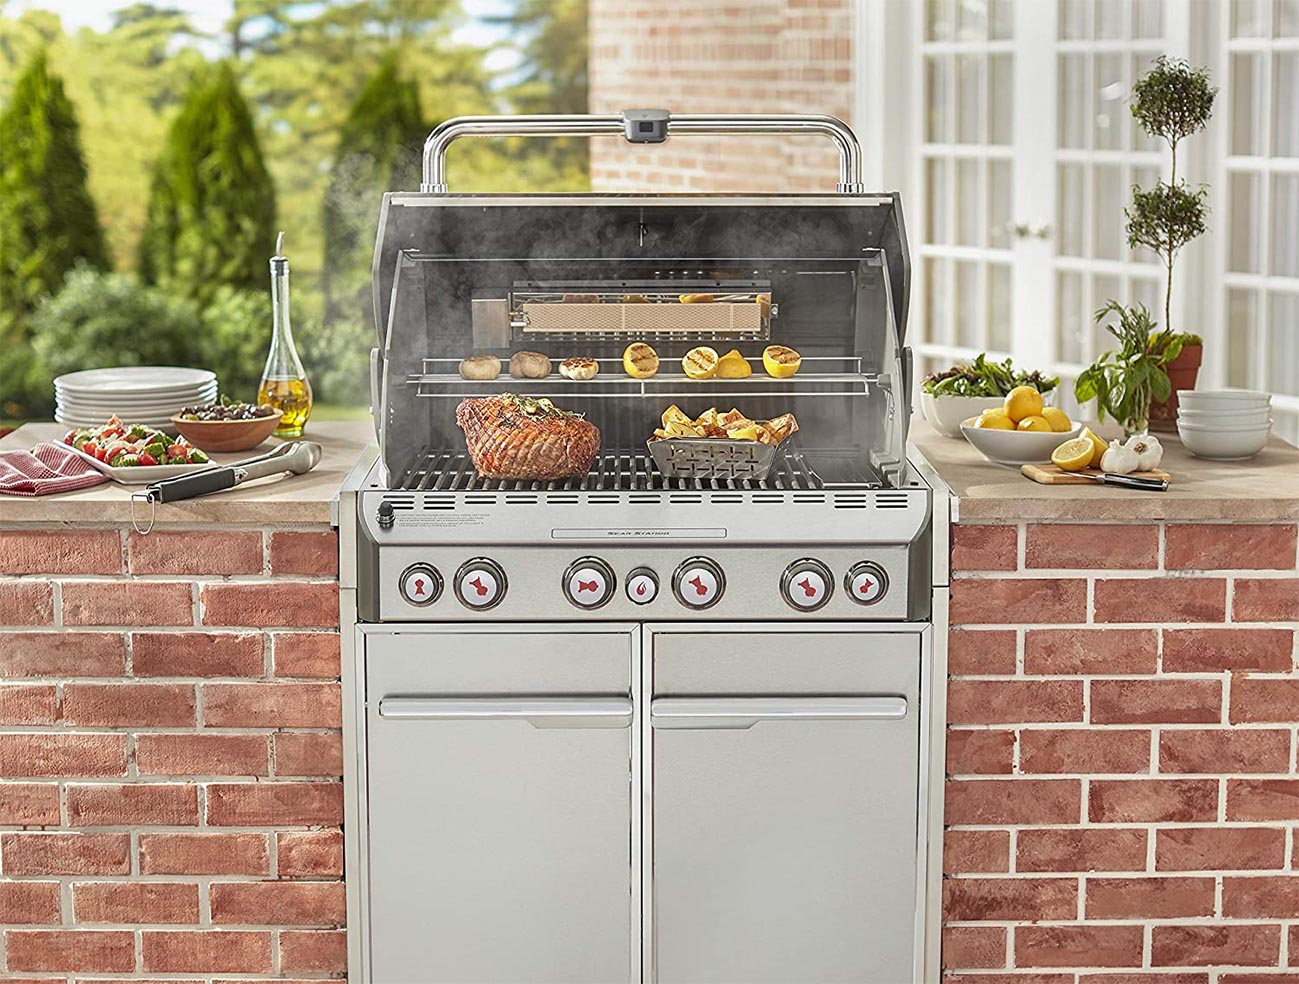 The Best Built-In Grill Options